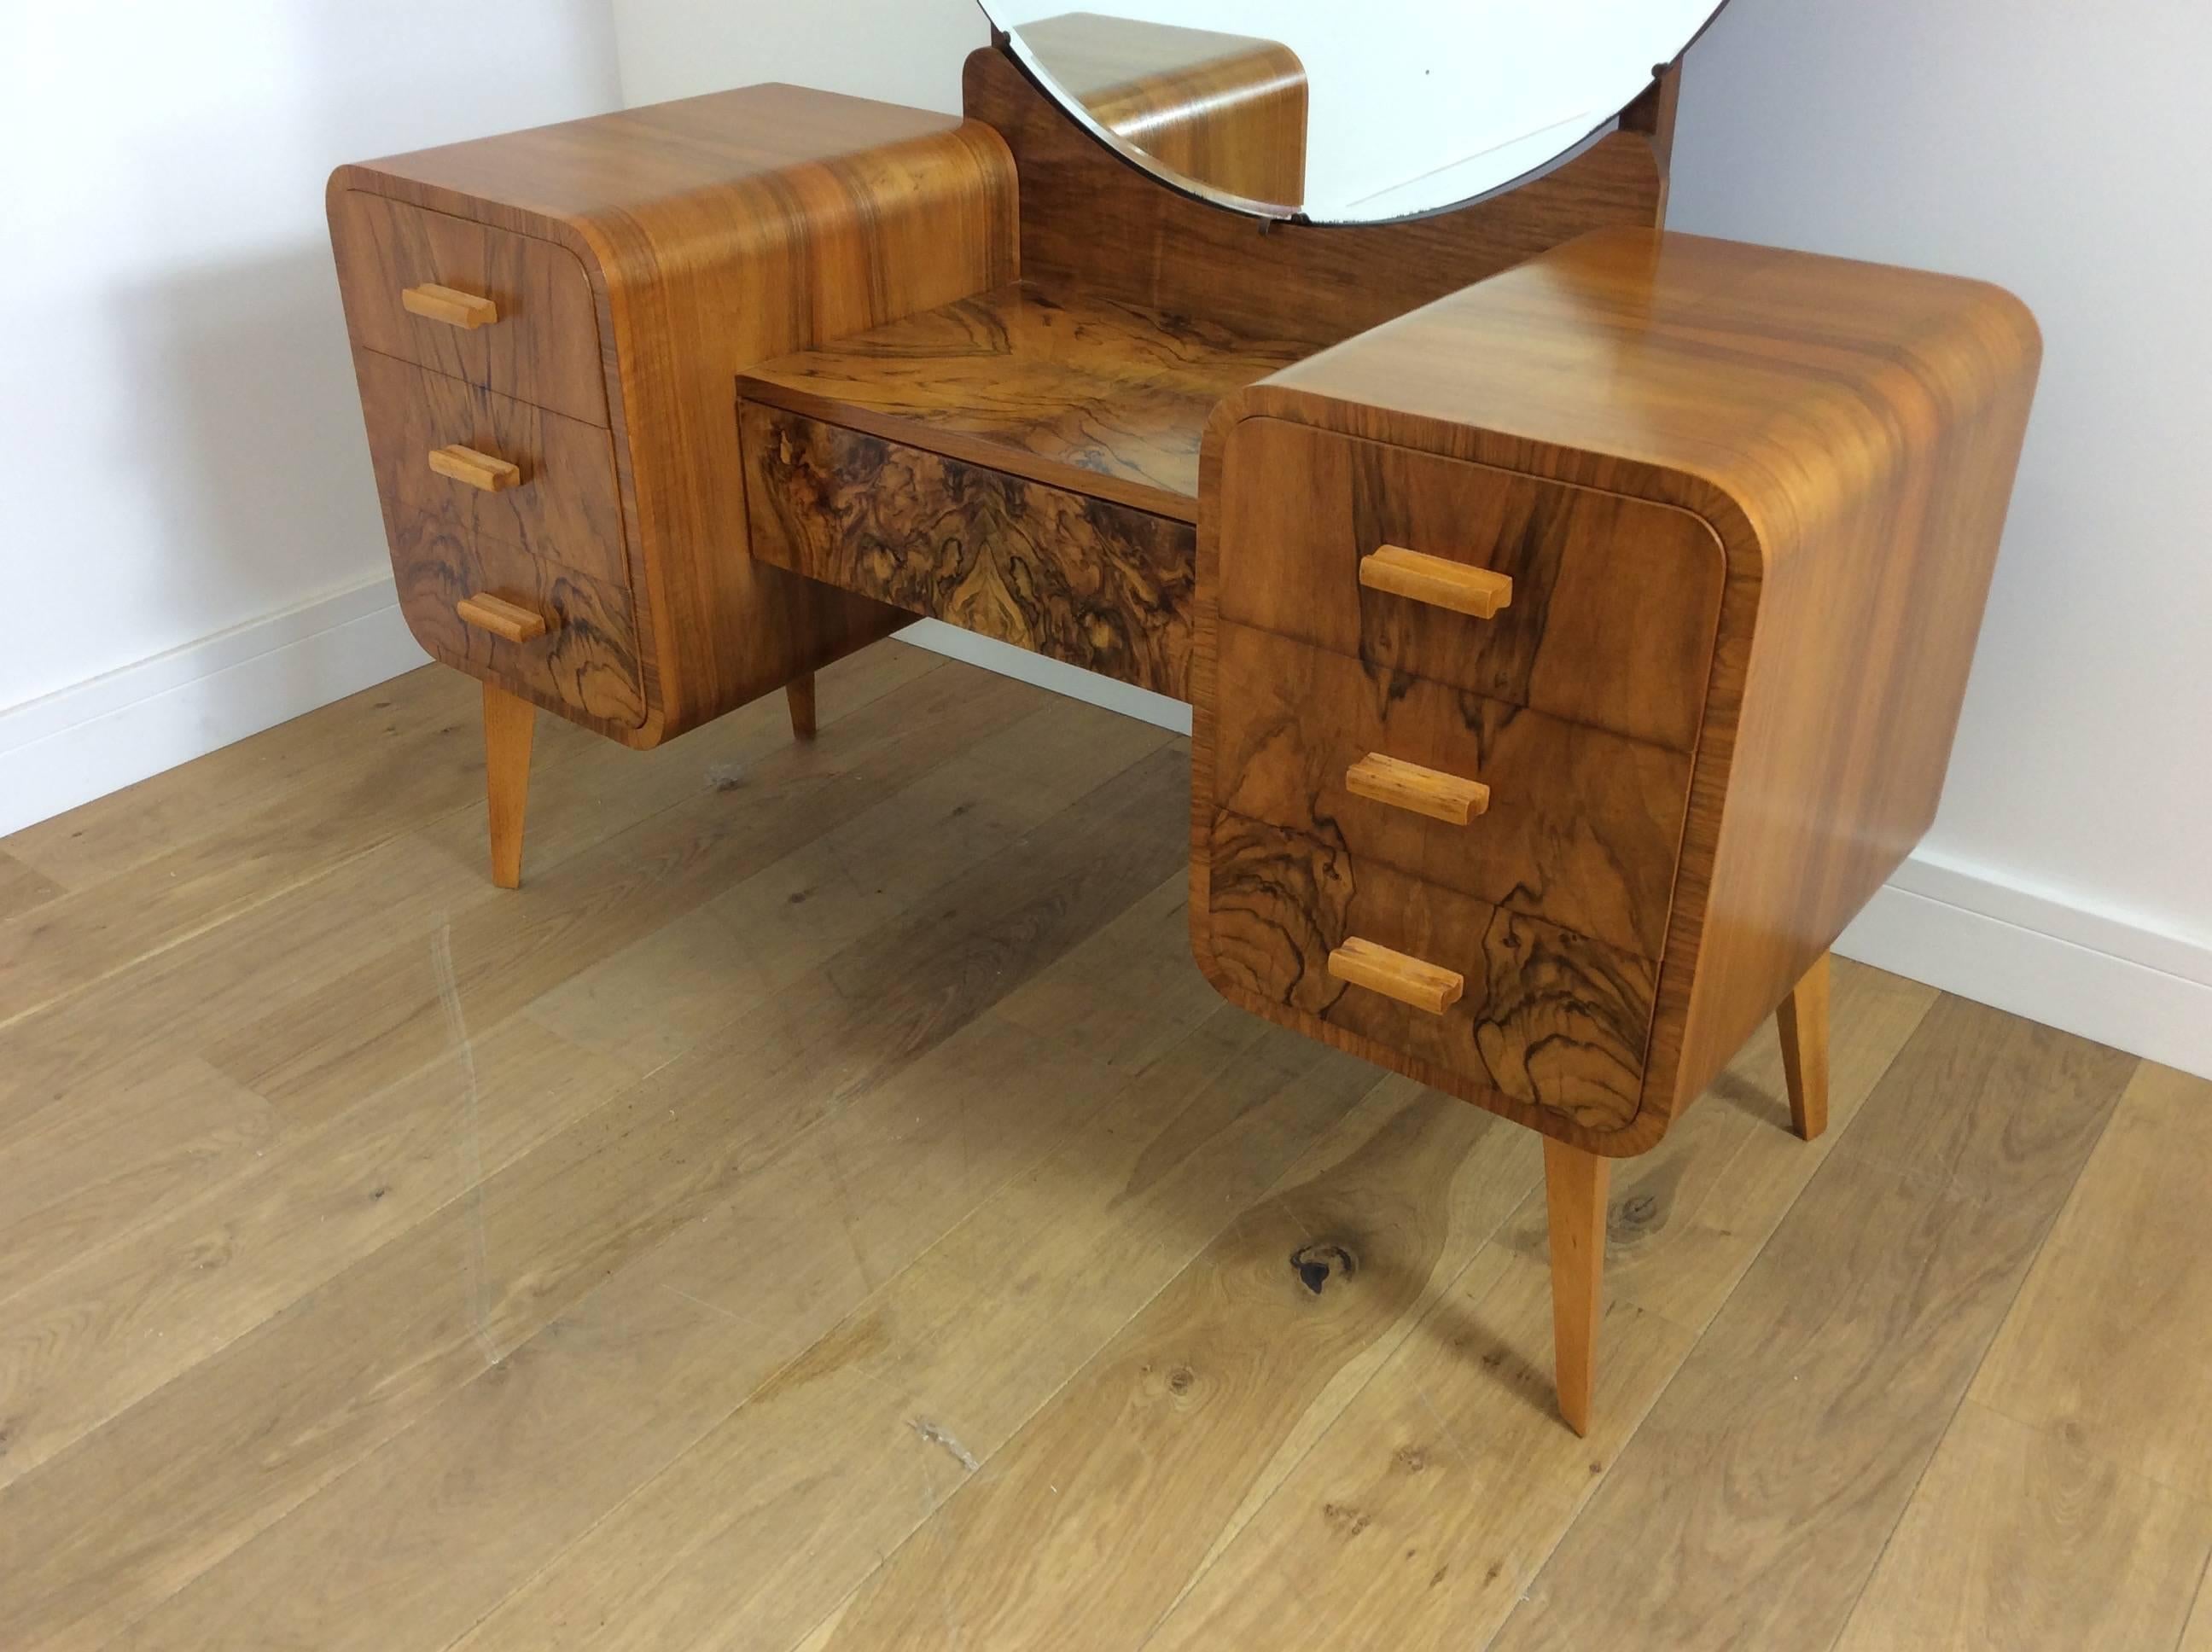 Polish Art Deco Dressing Table Made in Poland